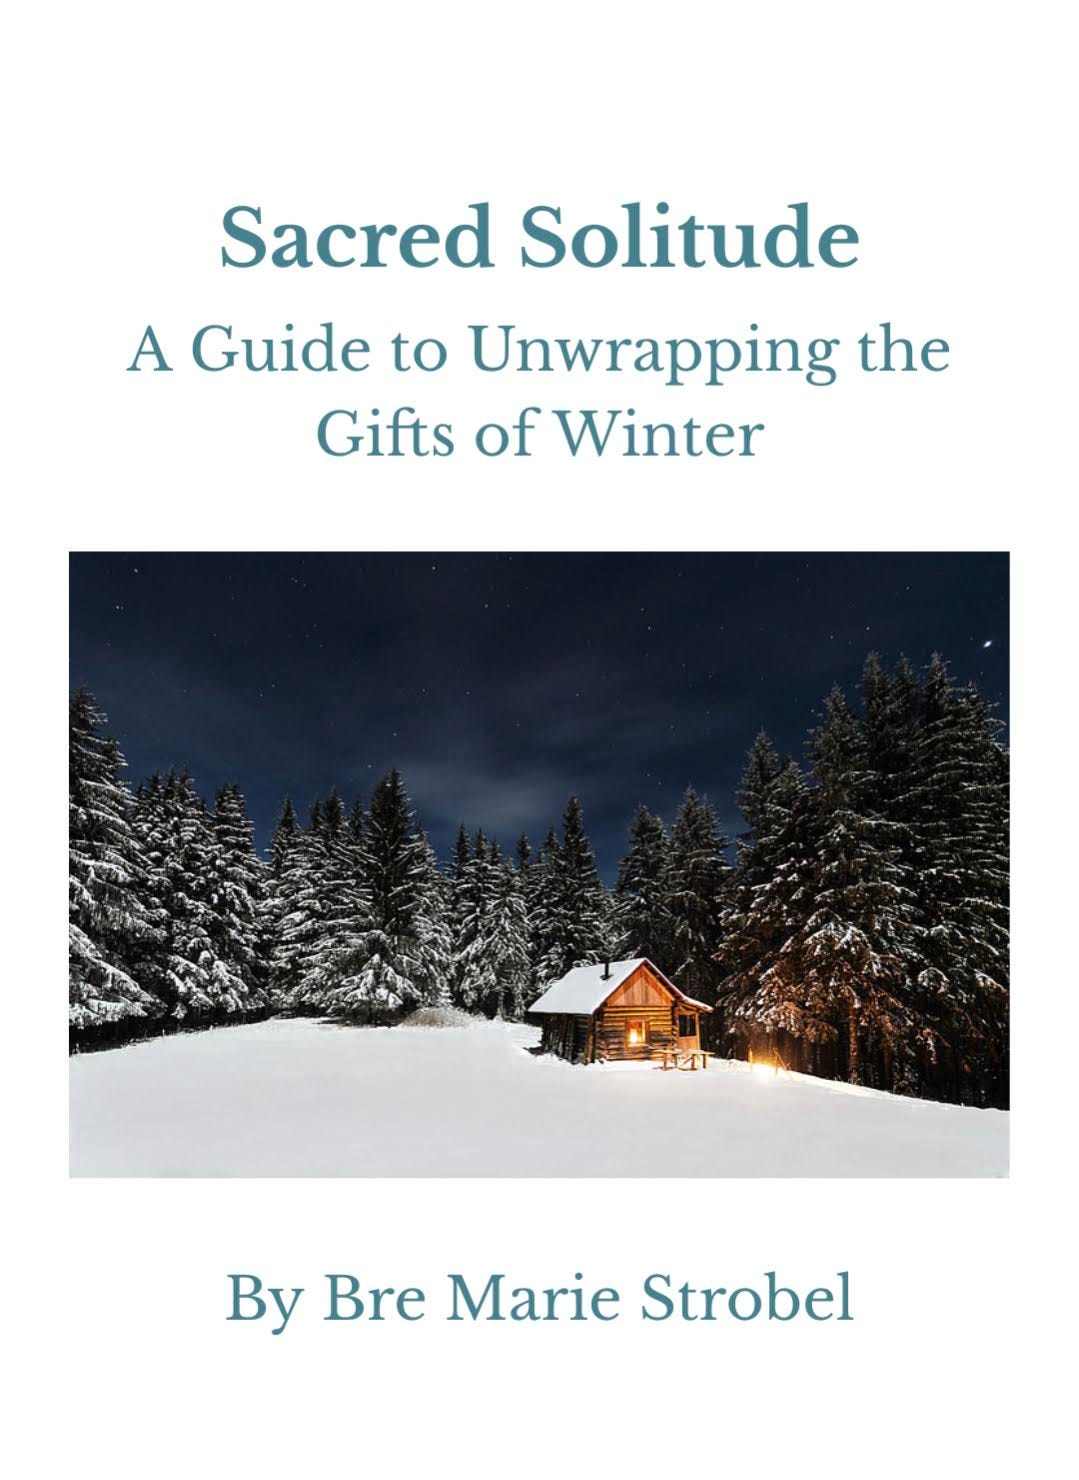 Image of my guide titled "Sacred Solitude: A Guide to Unwrapping the Gifts of Winter" with a winter scene of a log cabin in a clearing in the woods at night.